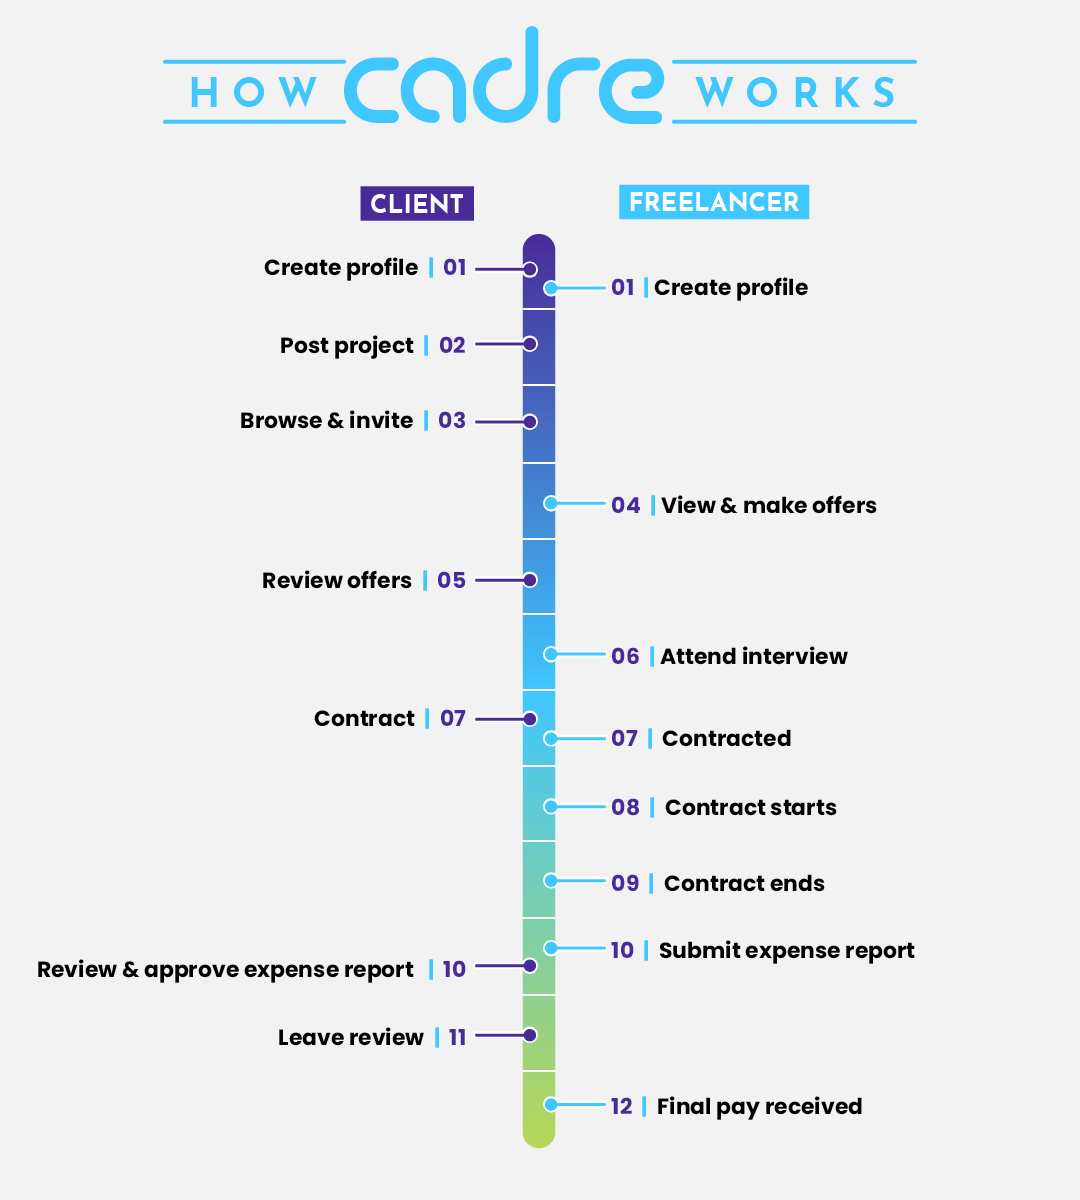 how cadre works_infographic_l4 copy.jpeg